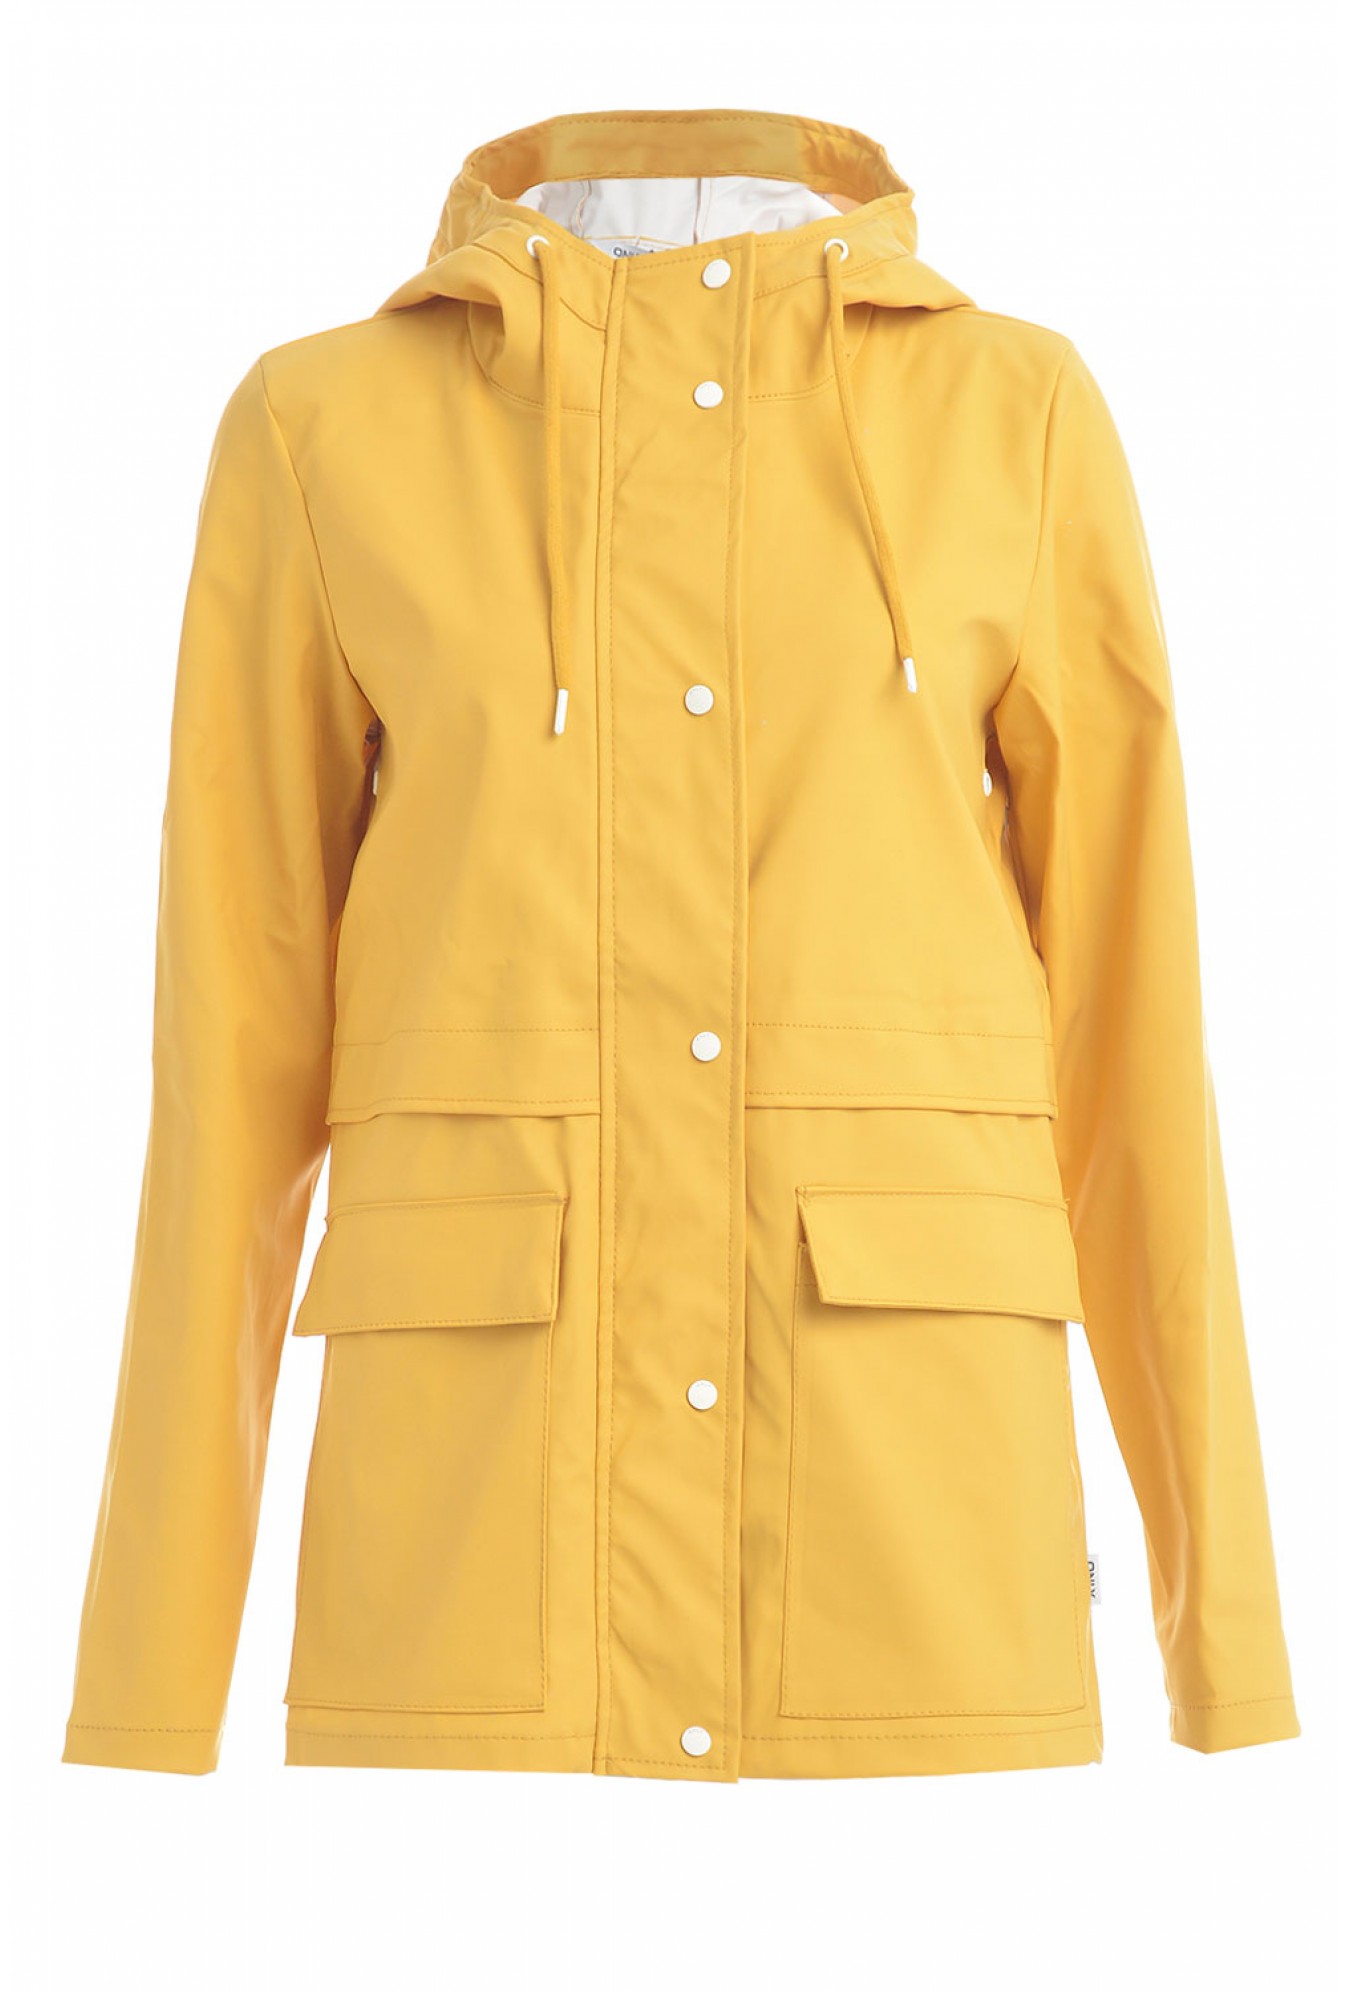 Only Train Short Raincoat in Yellow | iCLOTHING